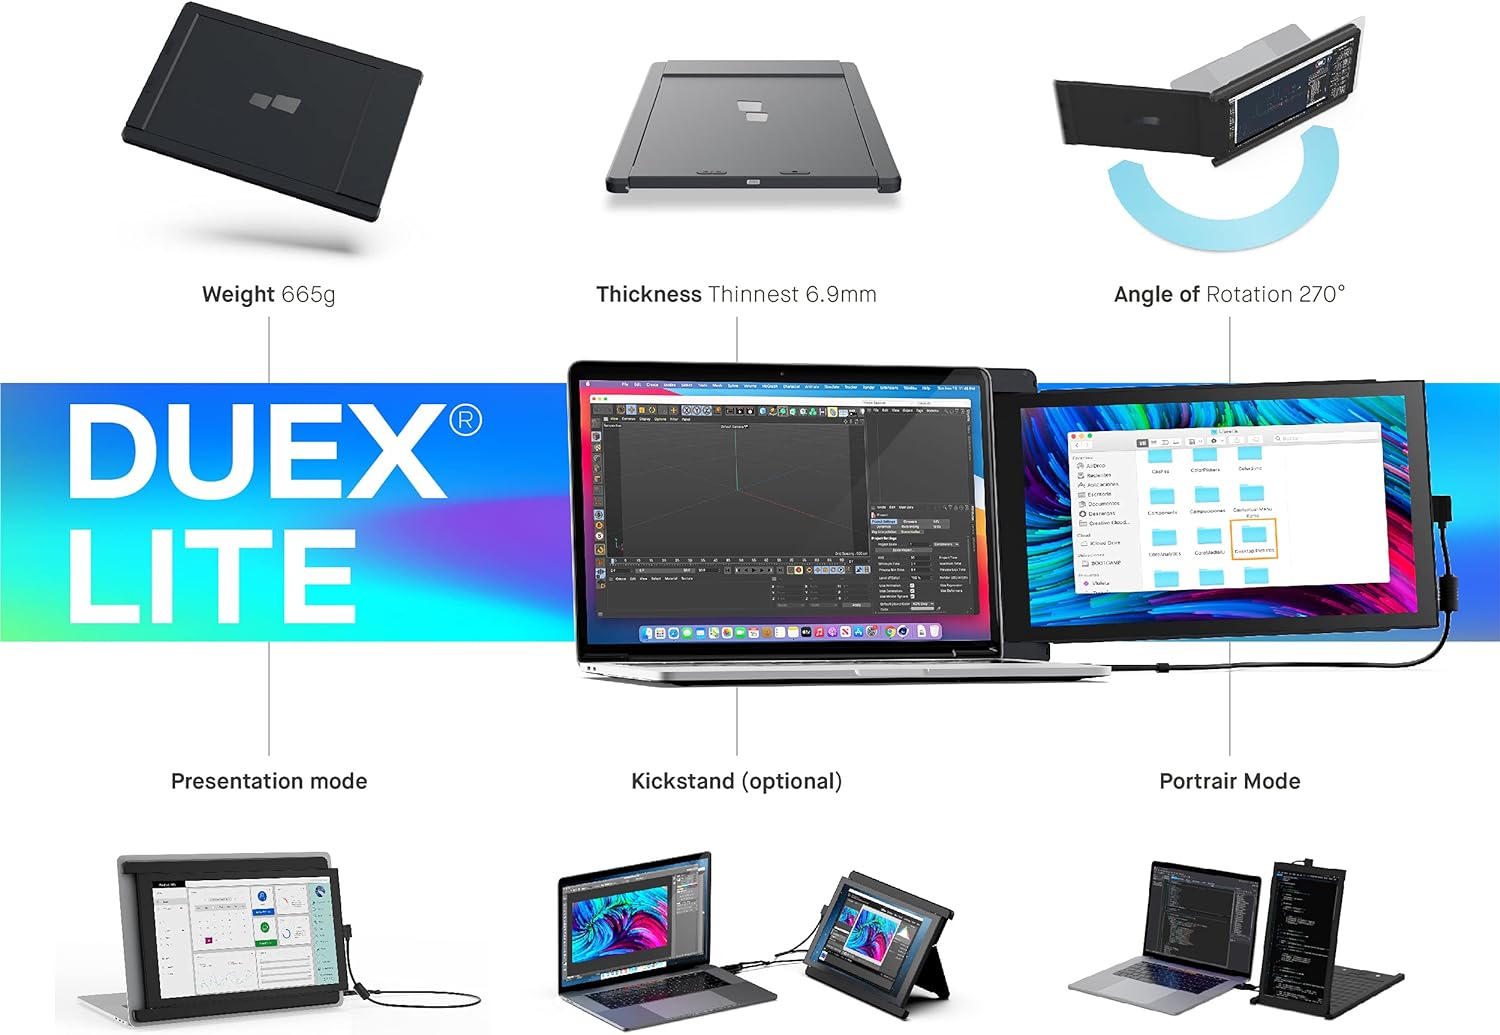 Duex Lite New Mobile Pixels Portable Monitor, 12.5" Full HD  - $110